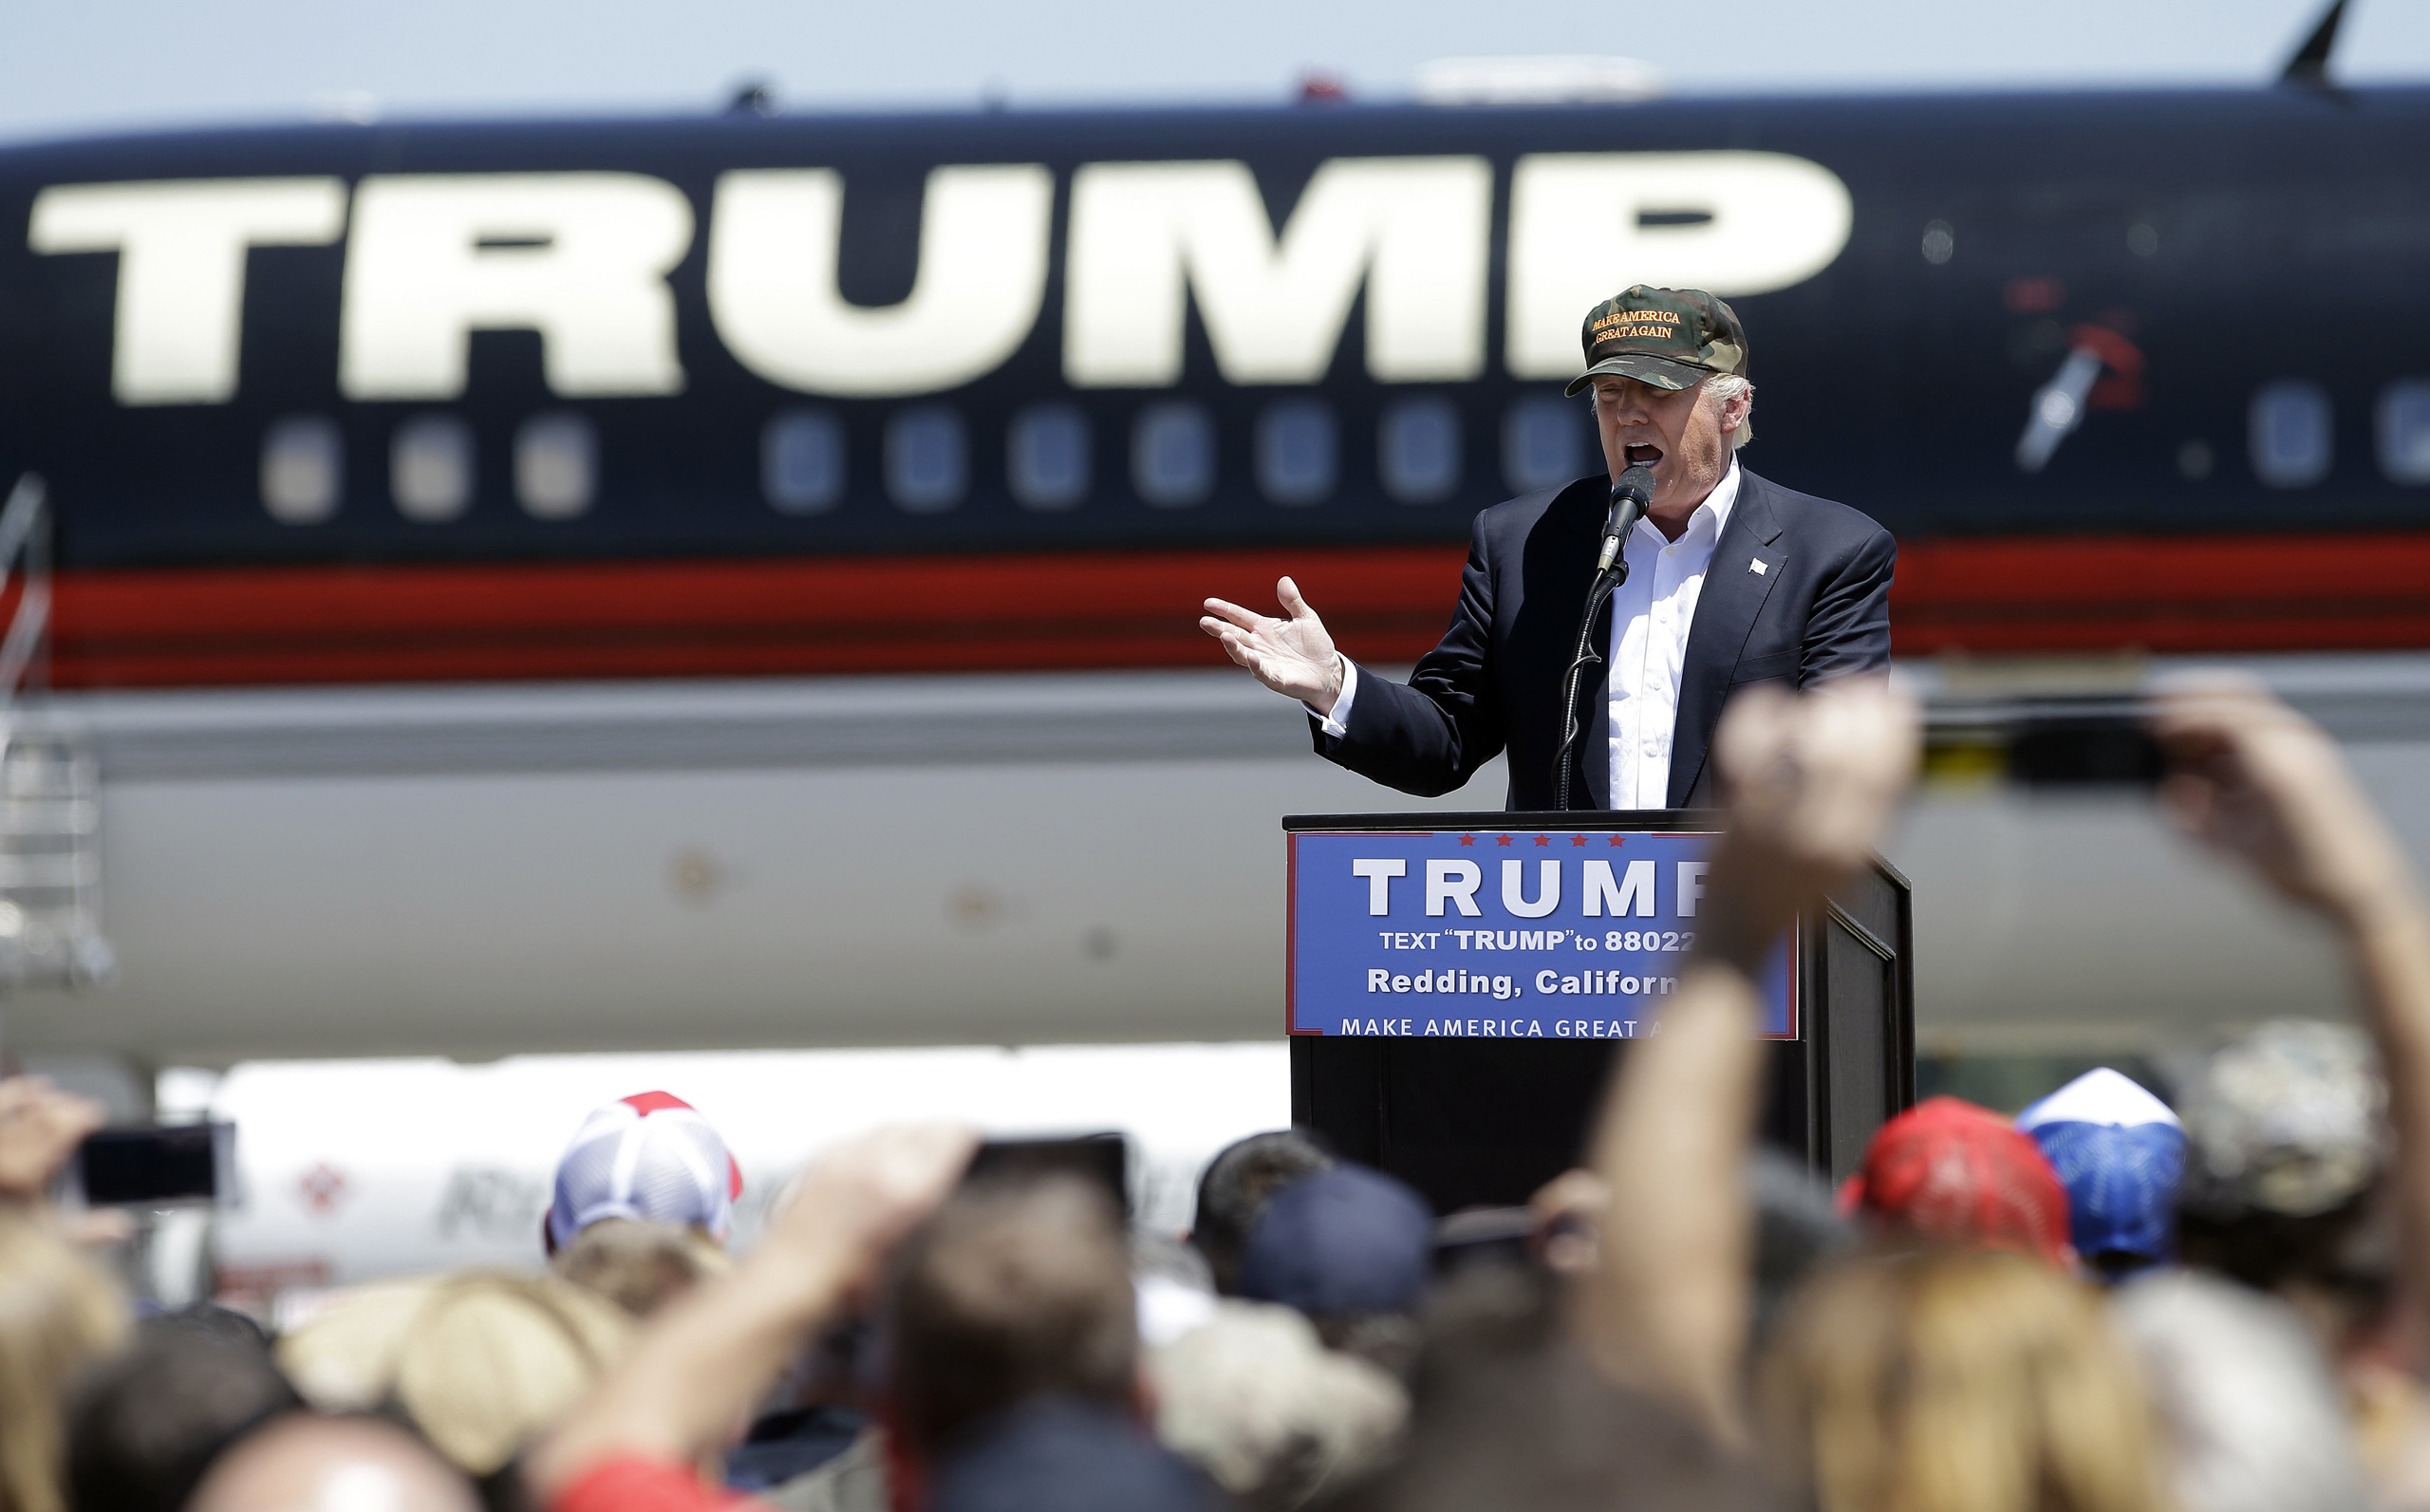 Republican presidential candidate Donald Trump speaks at a campaign rally at the Redding Municipal Airport in Redding, Calif., June 3, 2016. (Rich Pedroncelli—AP)